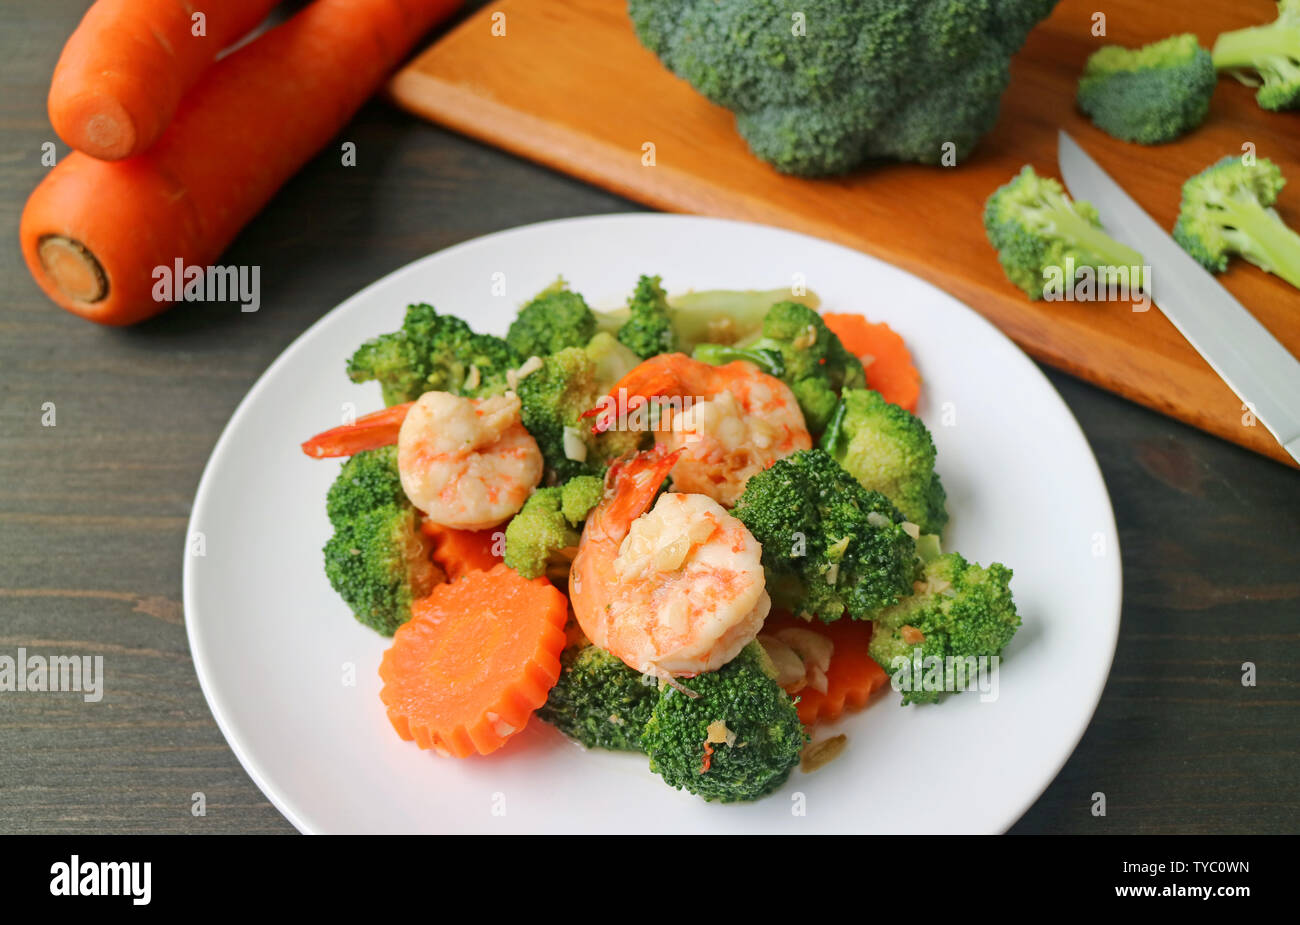 Plate of prawn stir fried with broccoli and carrot with blurry cut vegetables in background Stock Photo